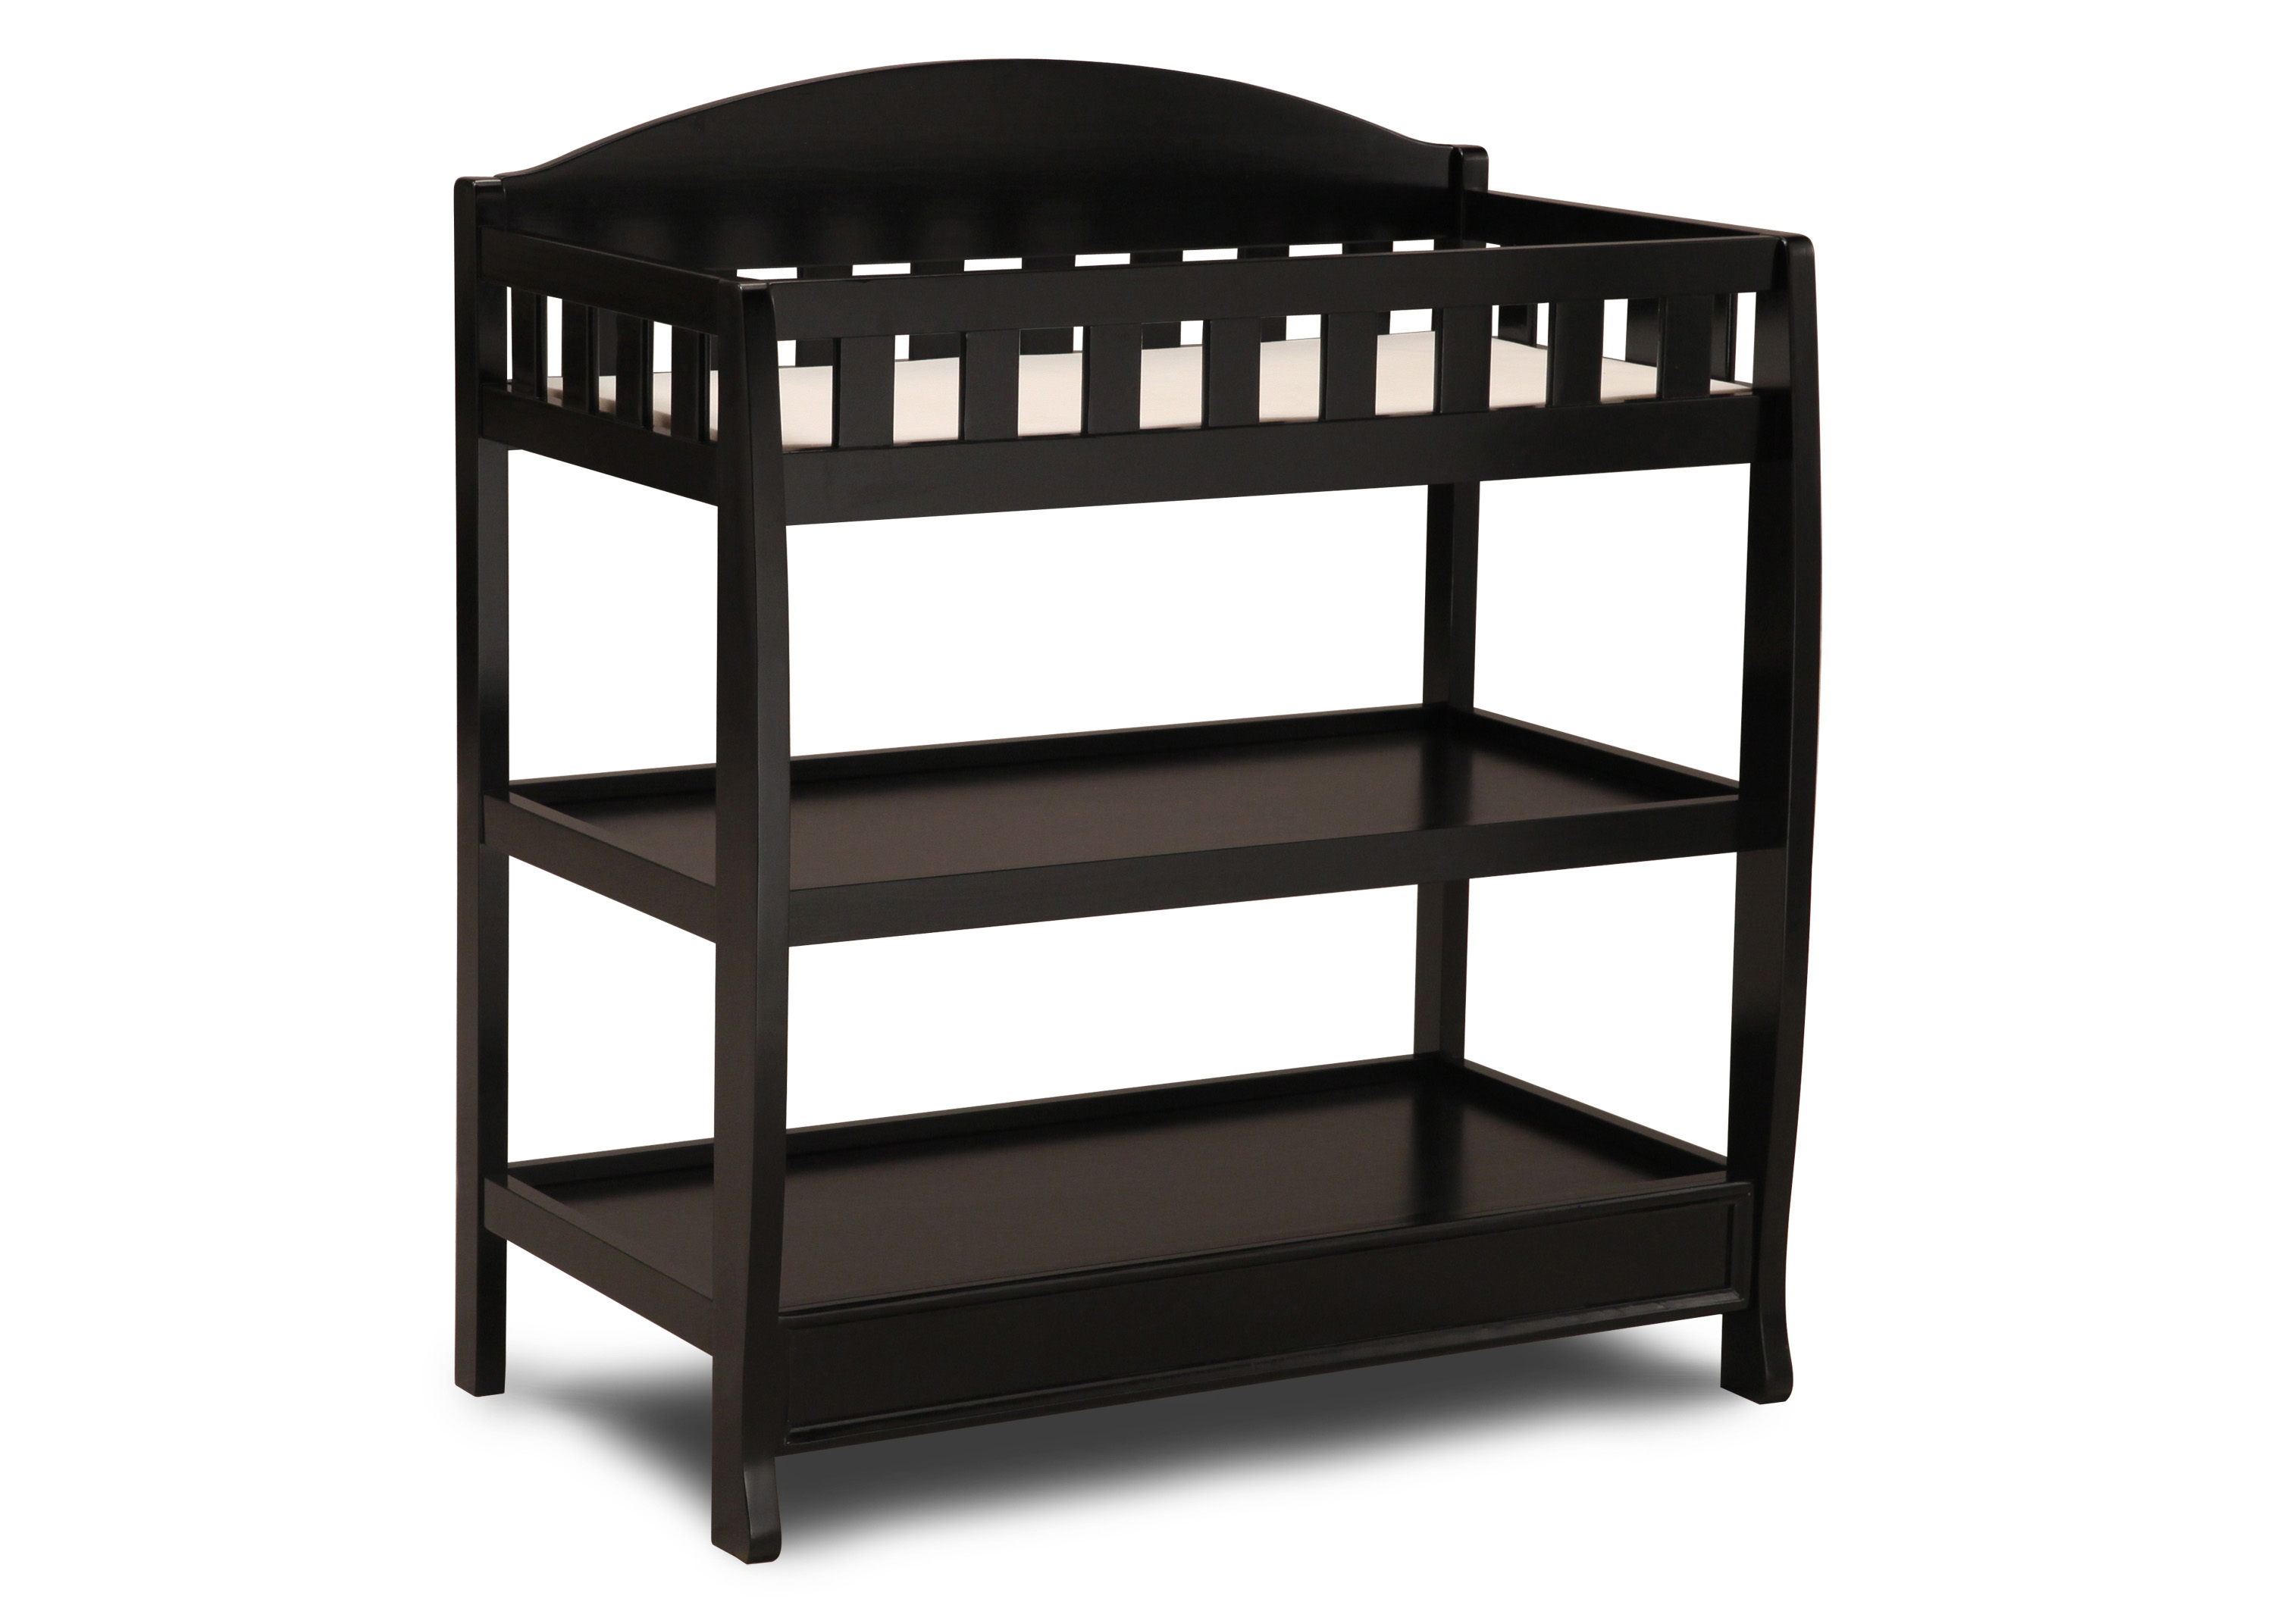 Delta Children Wilmington Changing Table with Pad, Ebony Black - image 5 of 8